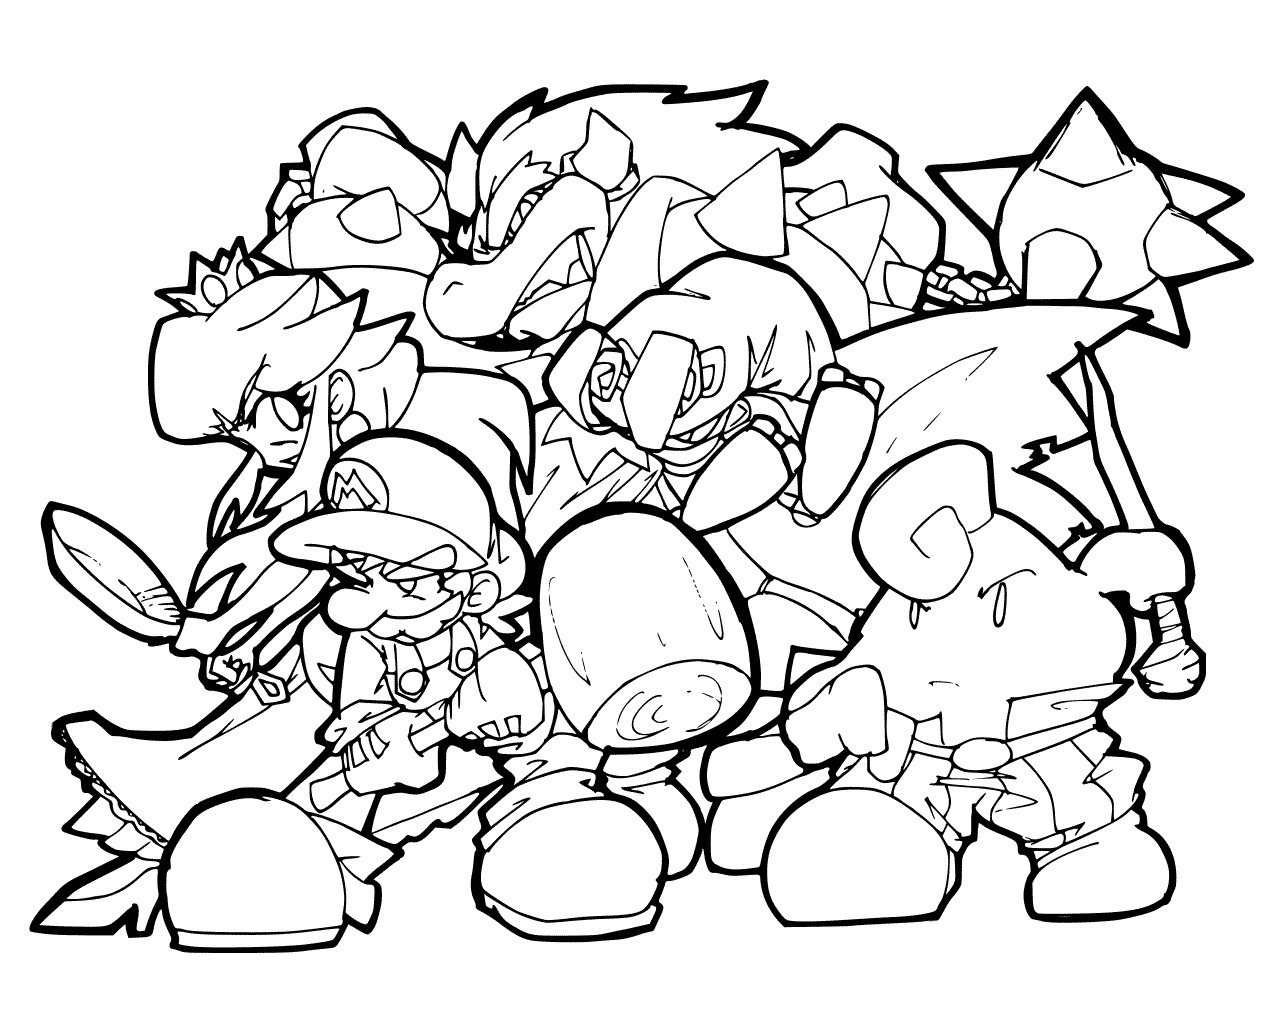 Bowser Coloring Pages - Best Coloring Pages For Kids  Super mario coloring  pages, Mario coloring pages, Coloring pages